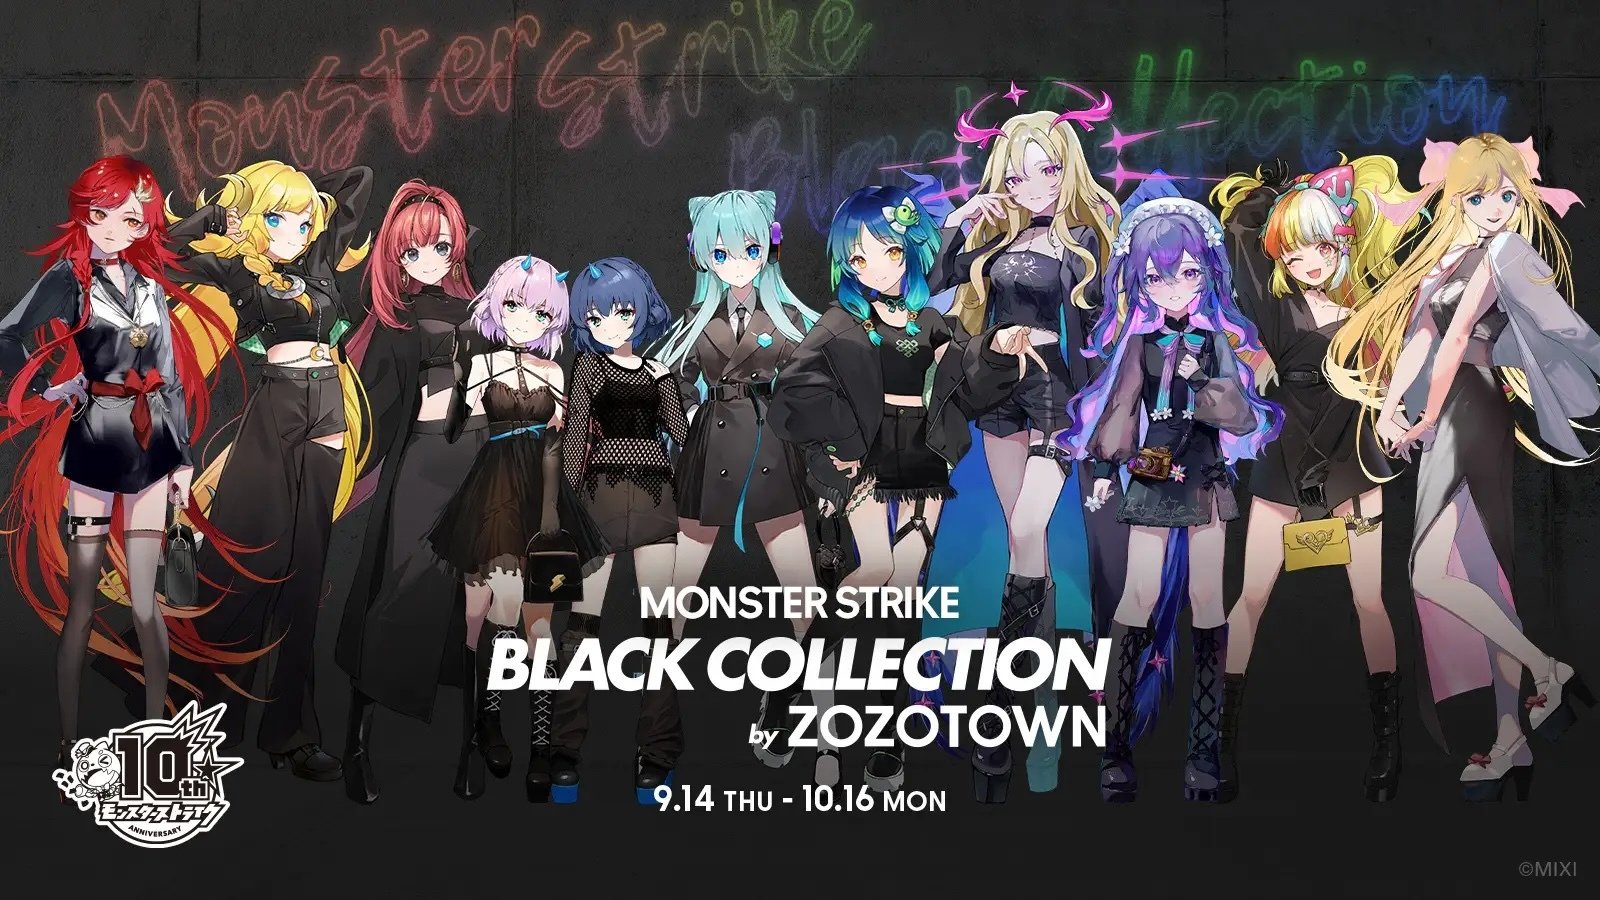 MONSTER STRIKE BLACK COLLECTION by ZOZOTOWN